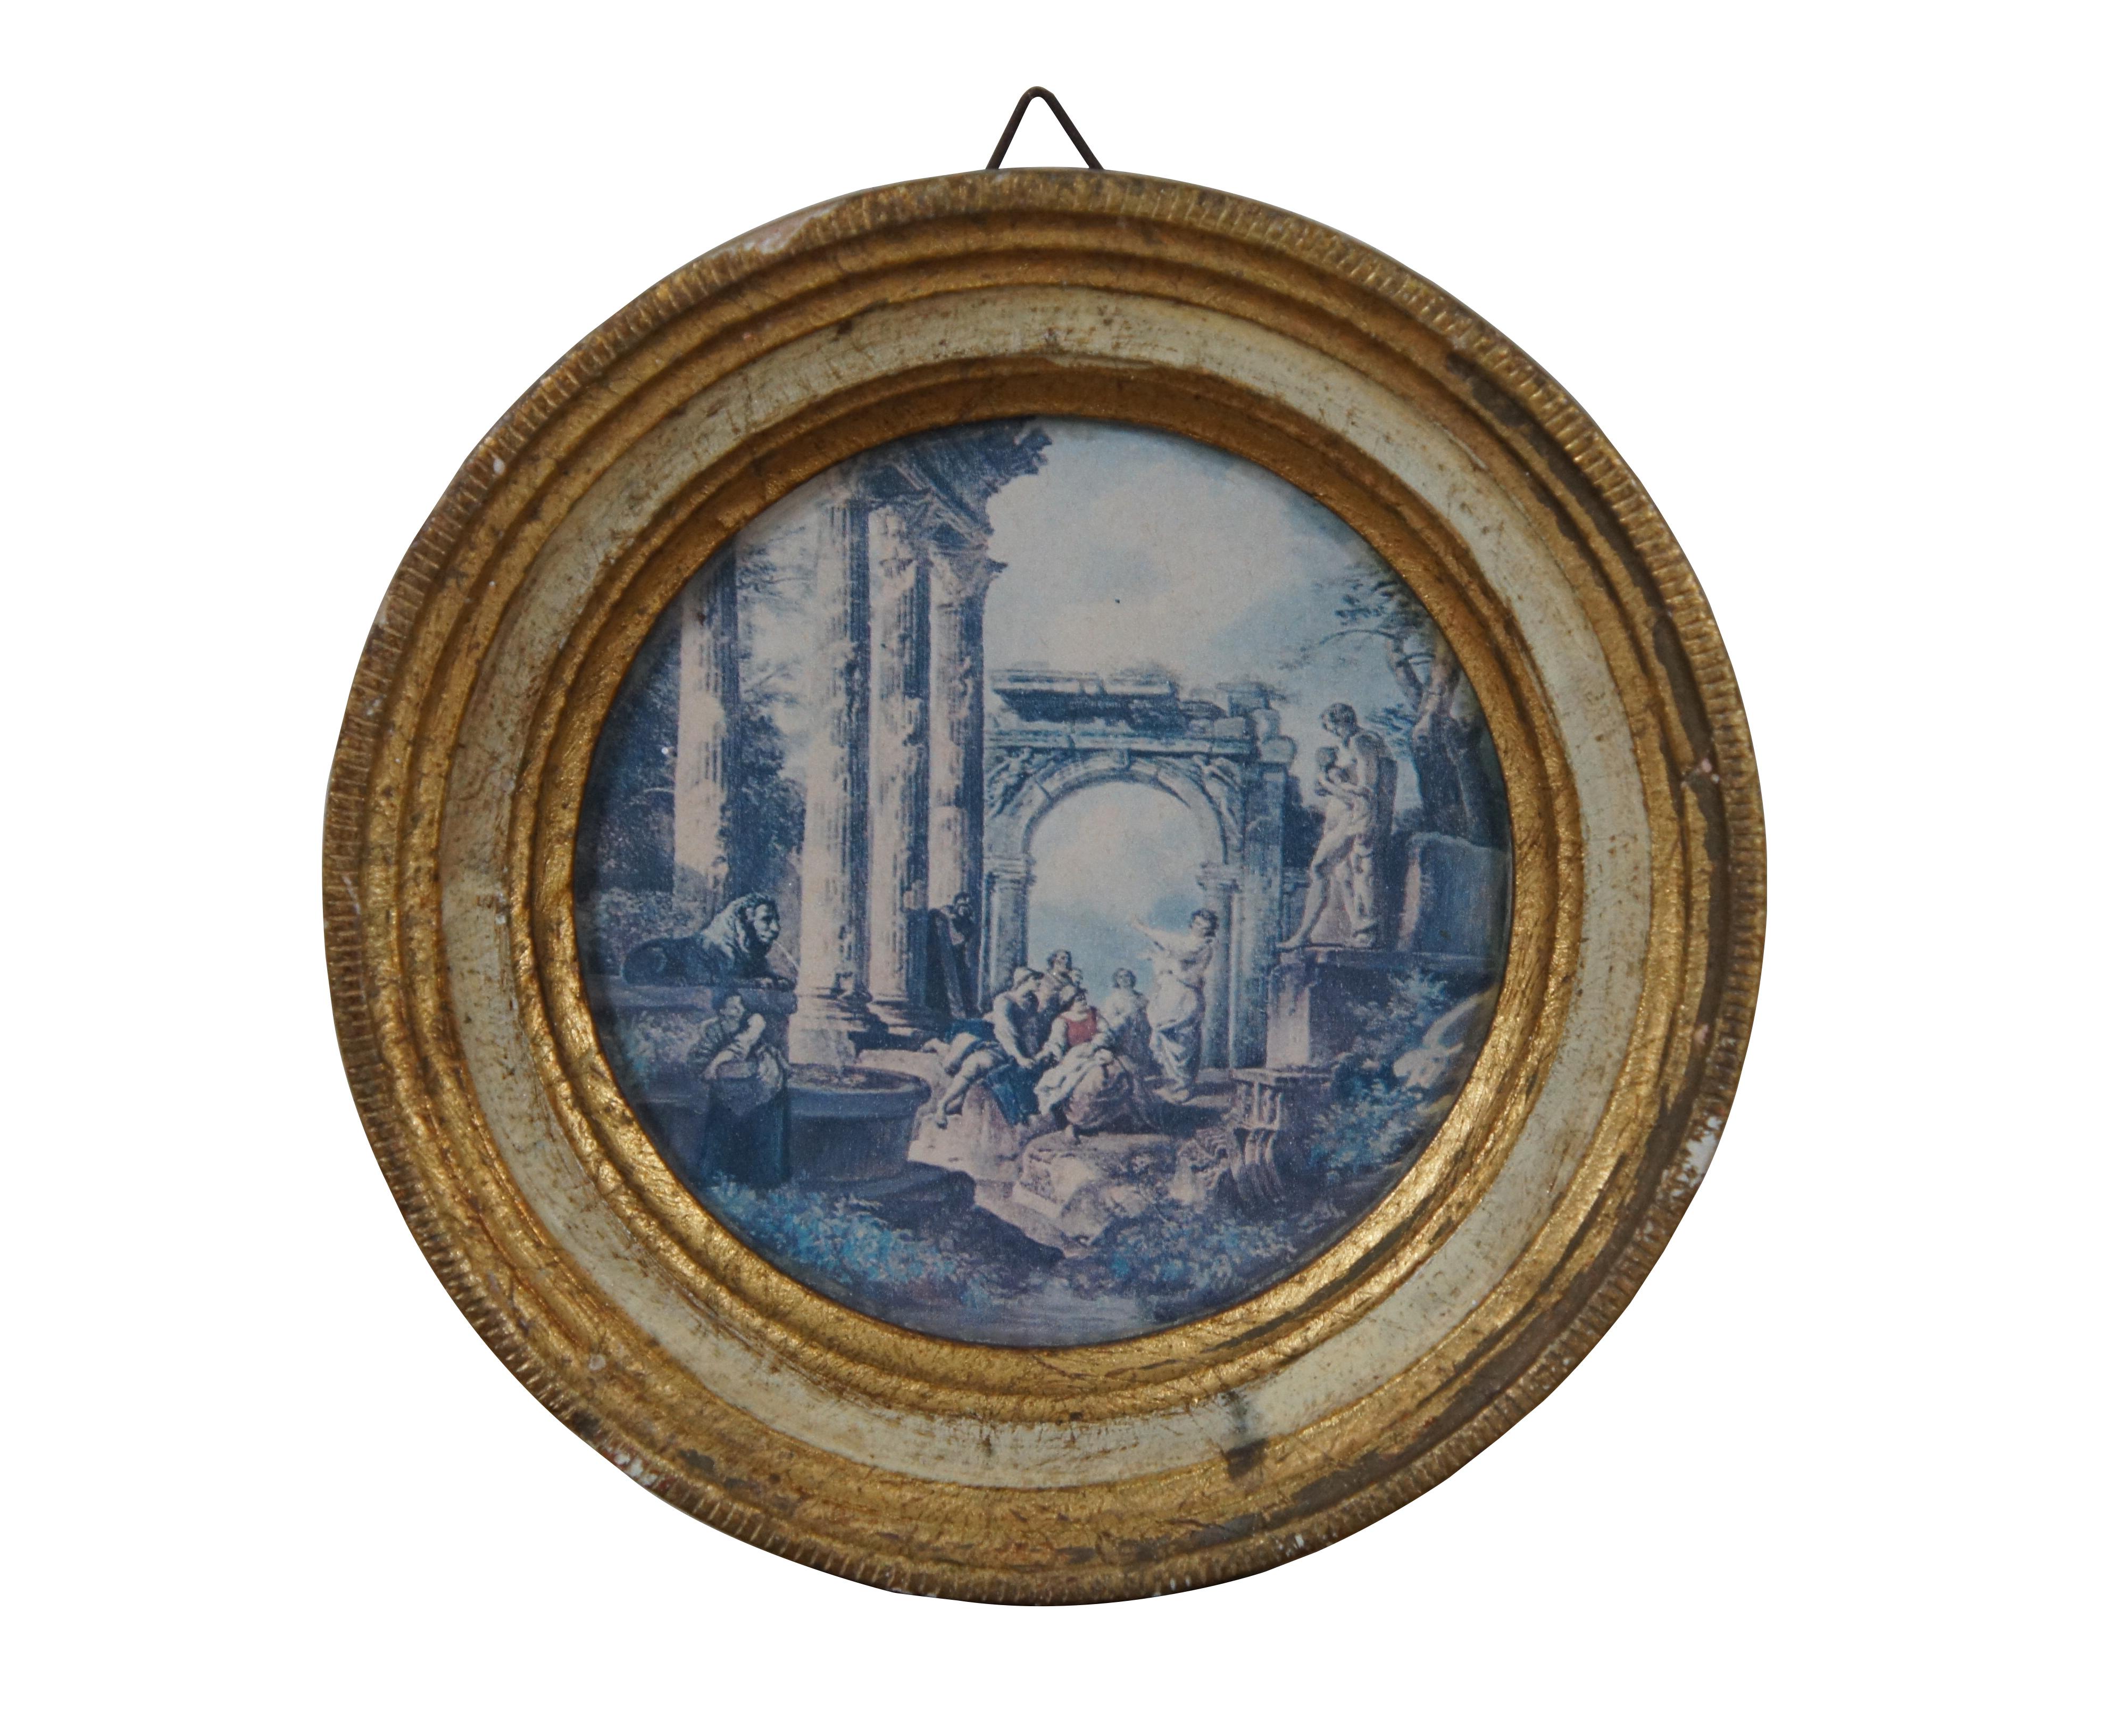 Pair of mid century small, round prints of  scenes of Roman ruins with figures by Gian Paolo Panini. Framed in distressed gold / gilt and white frames. The one with the lion fountain identified specifically as “Homily of an Apostle in Roman Ruins.”